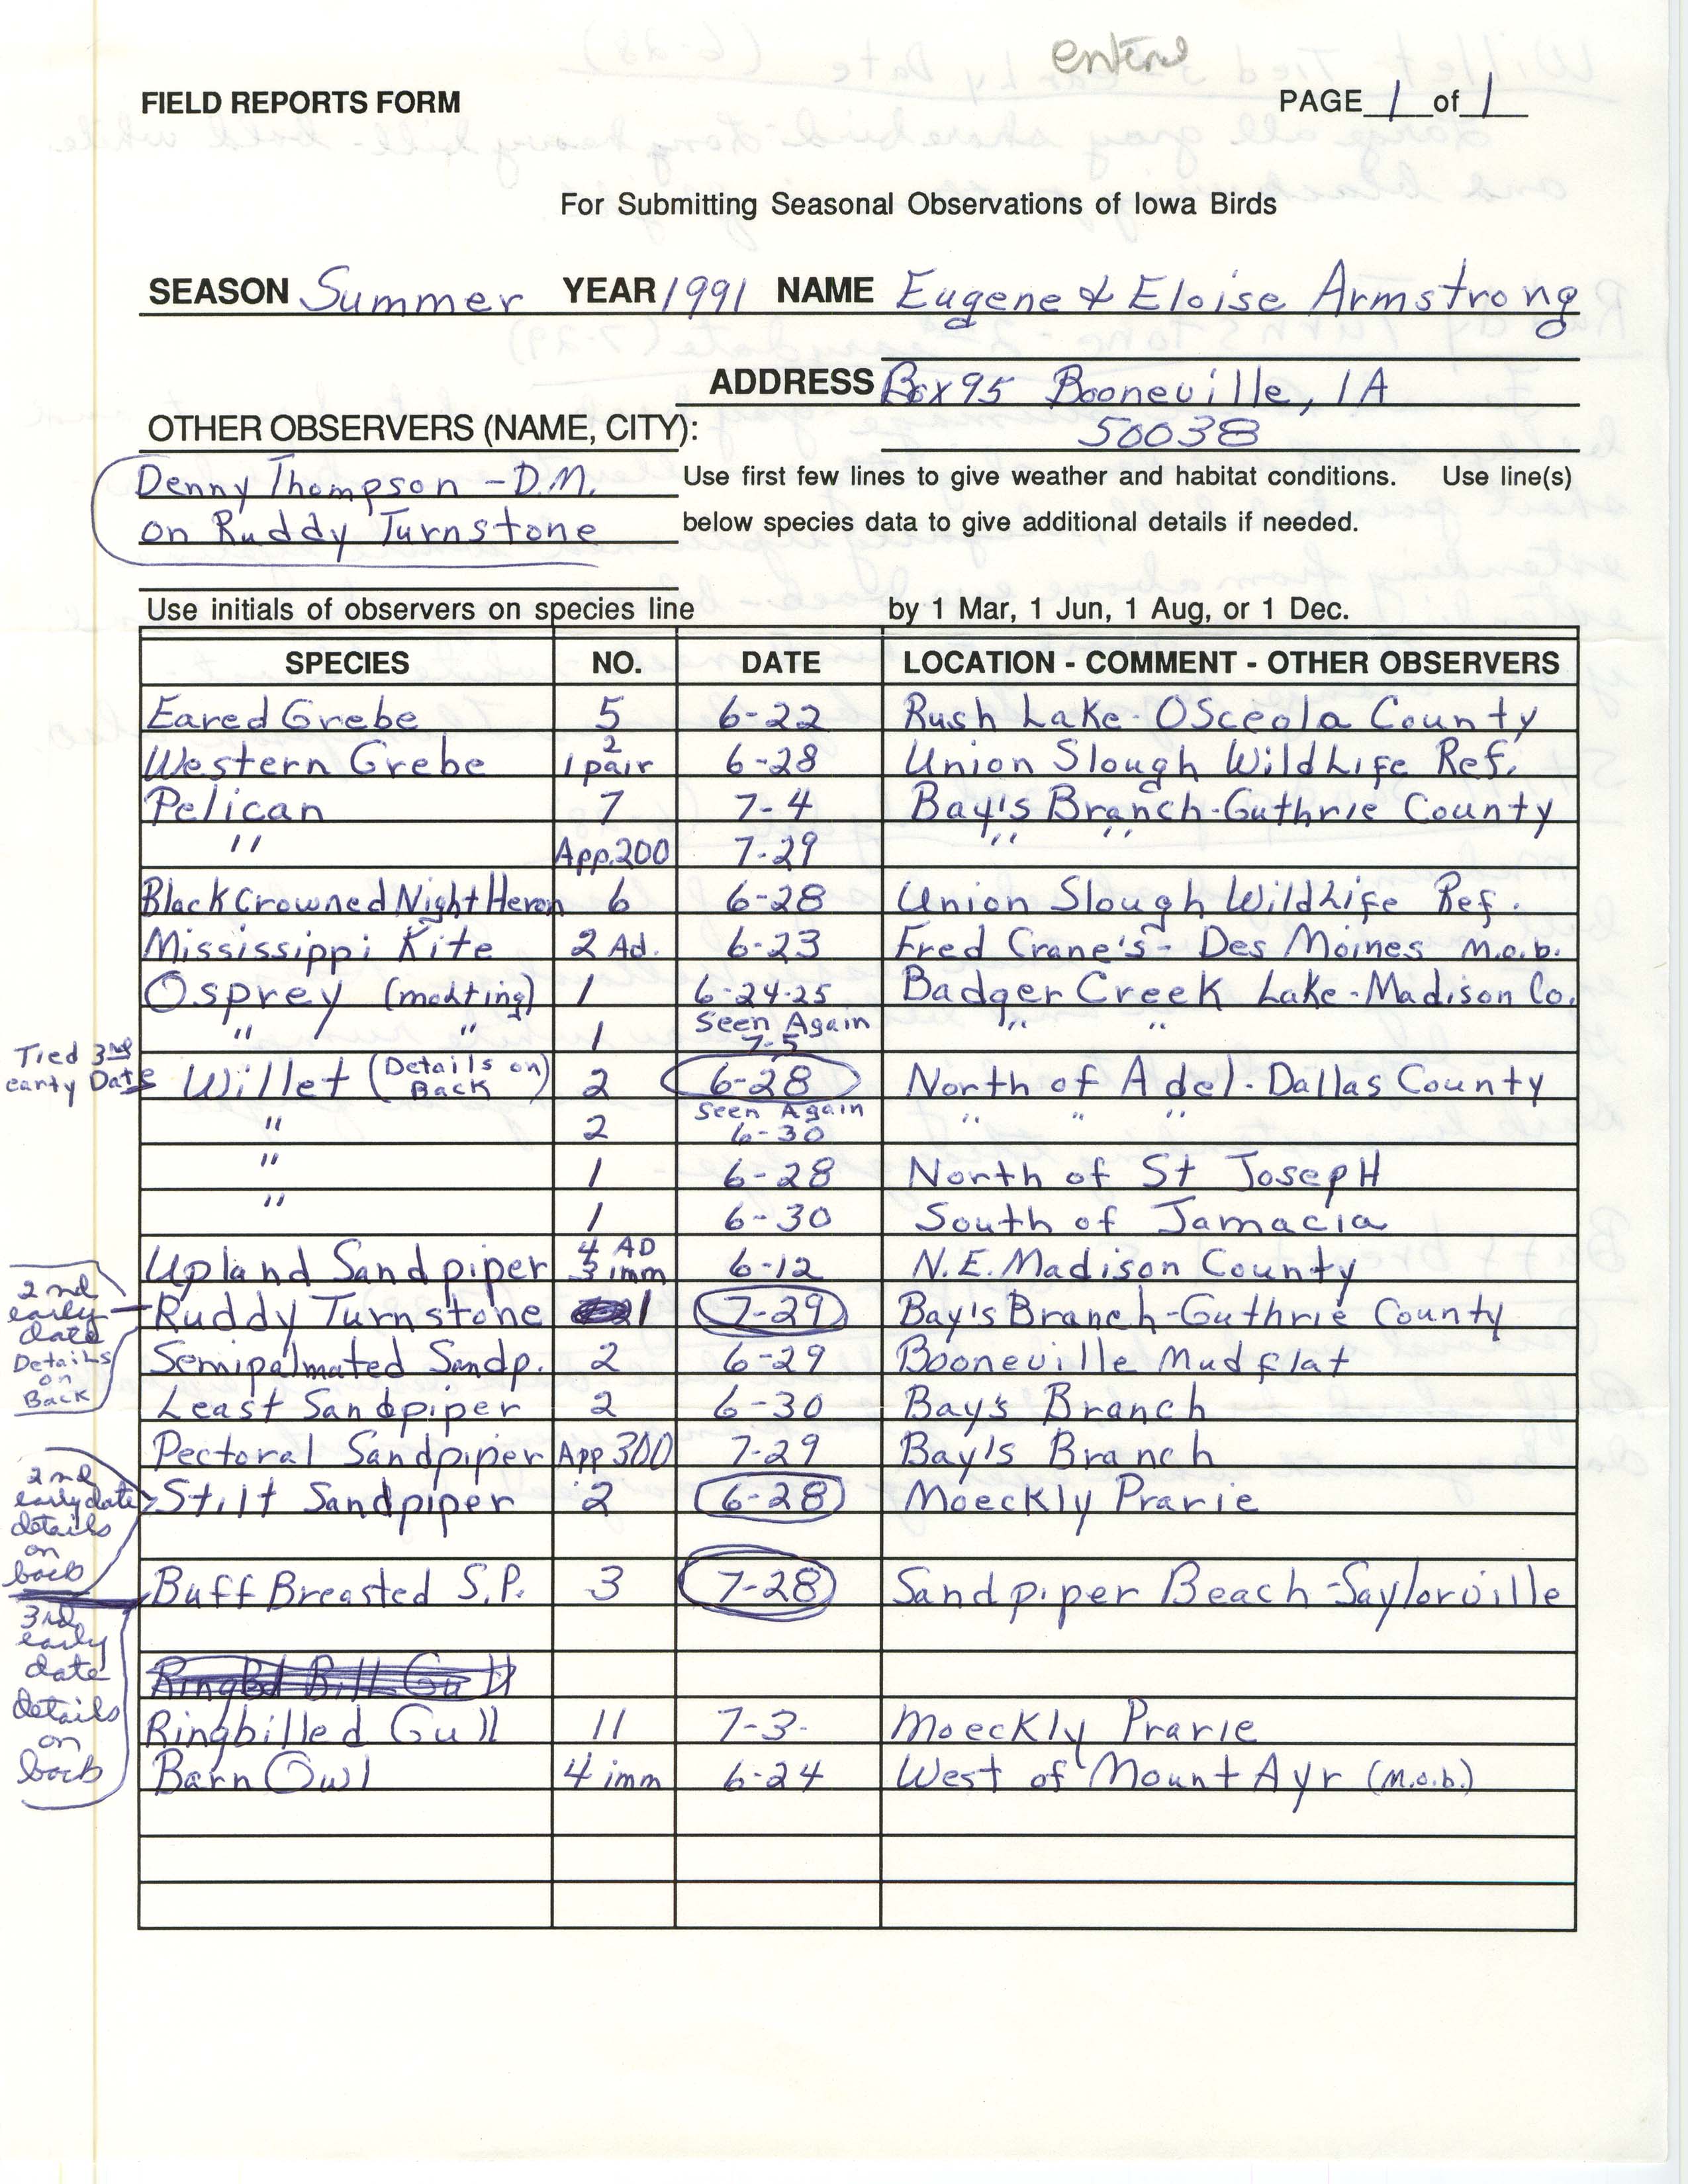 Field reports form for submitting seasonal observations of Iowa birds, Eloise Armstrong and Eugene Armstrong, summer 1991